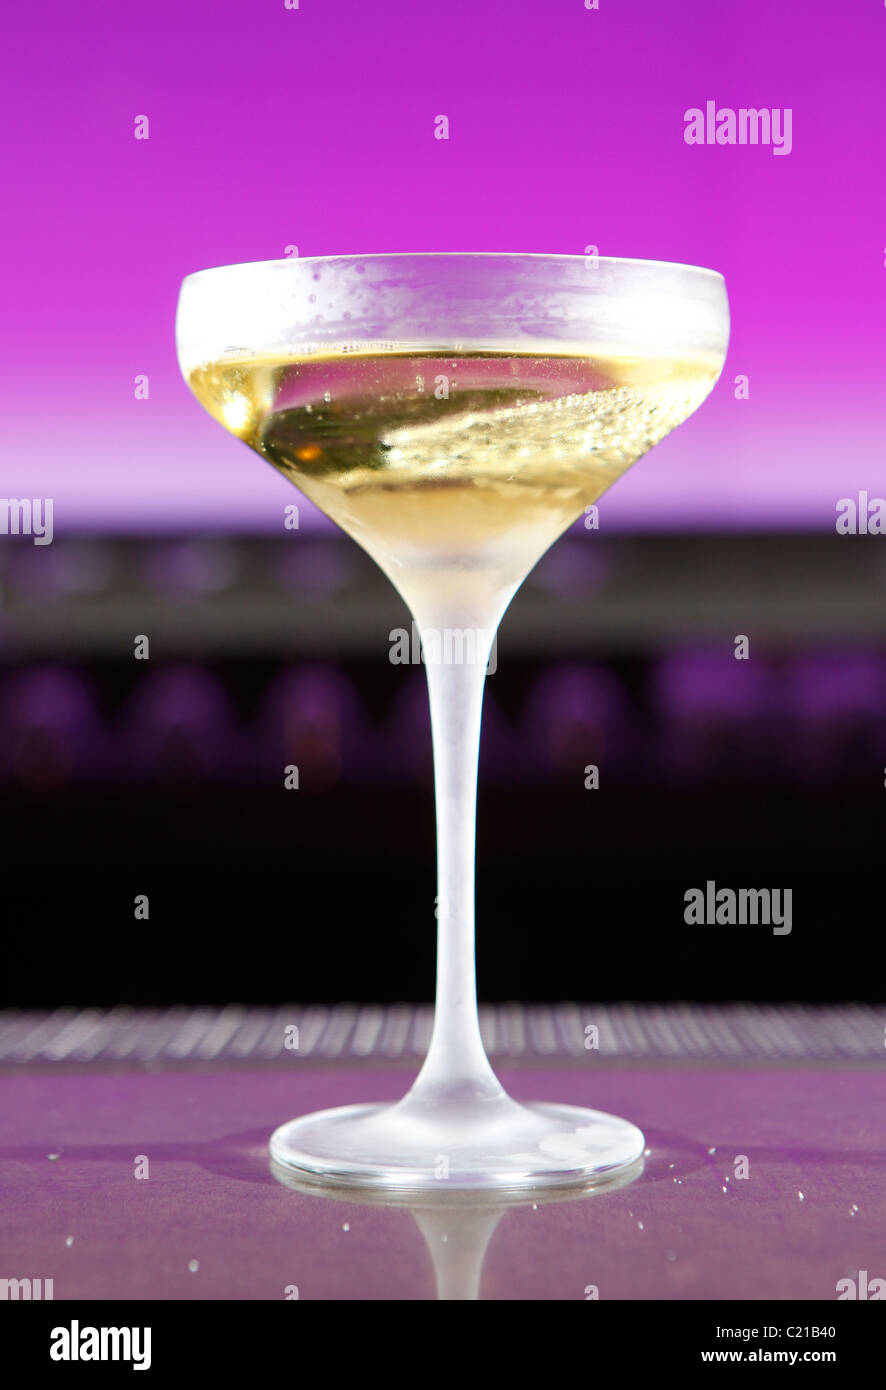 Glass of champagne on a bar. Stock Photo